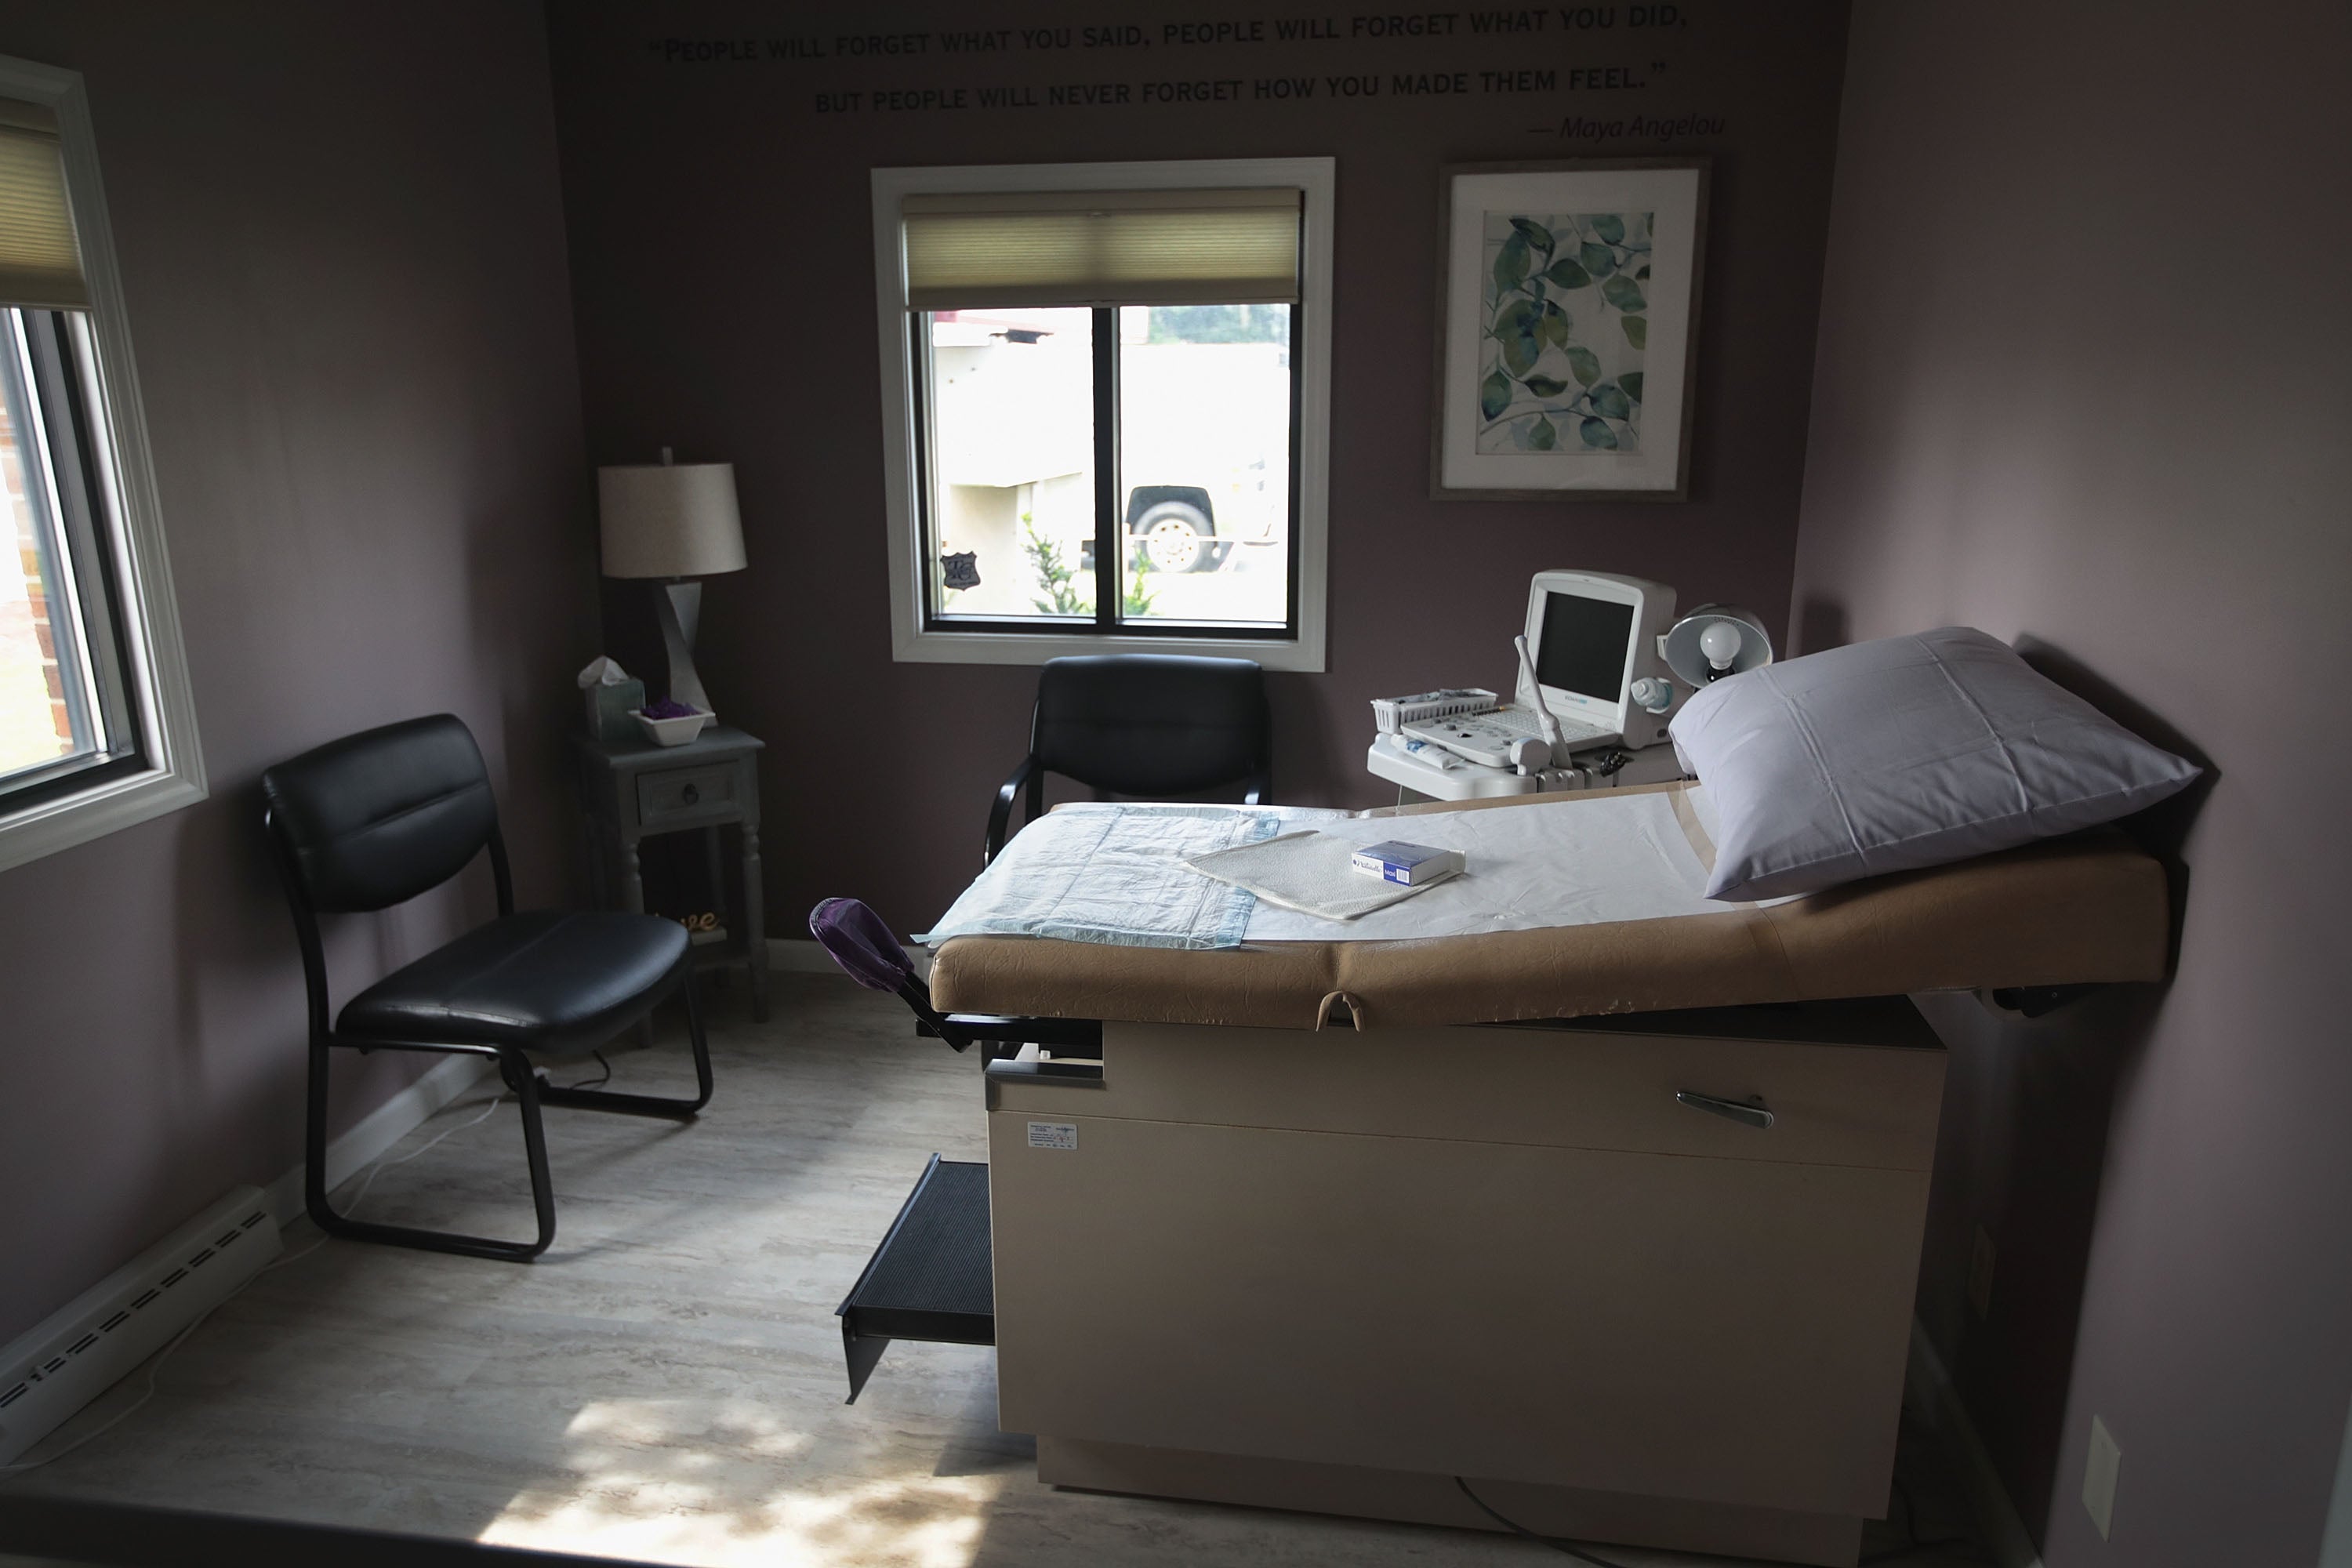 As part of a case brought by abortion provider Whole Woman’s Health Alliance, pictured above, a federal judge on Tuesday, 10 August, 2021, halted down multiple Indiana abortion restrictions.